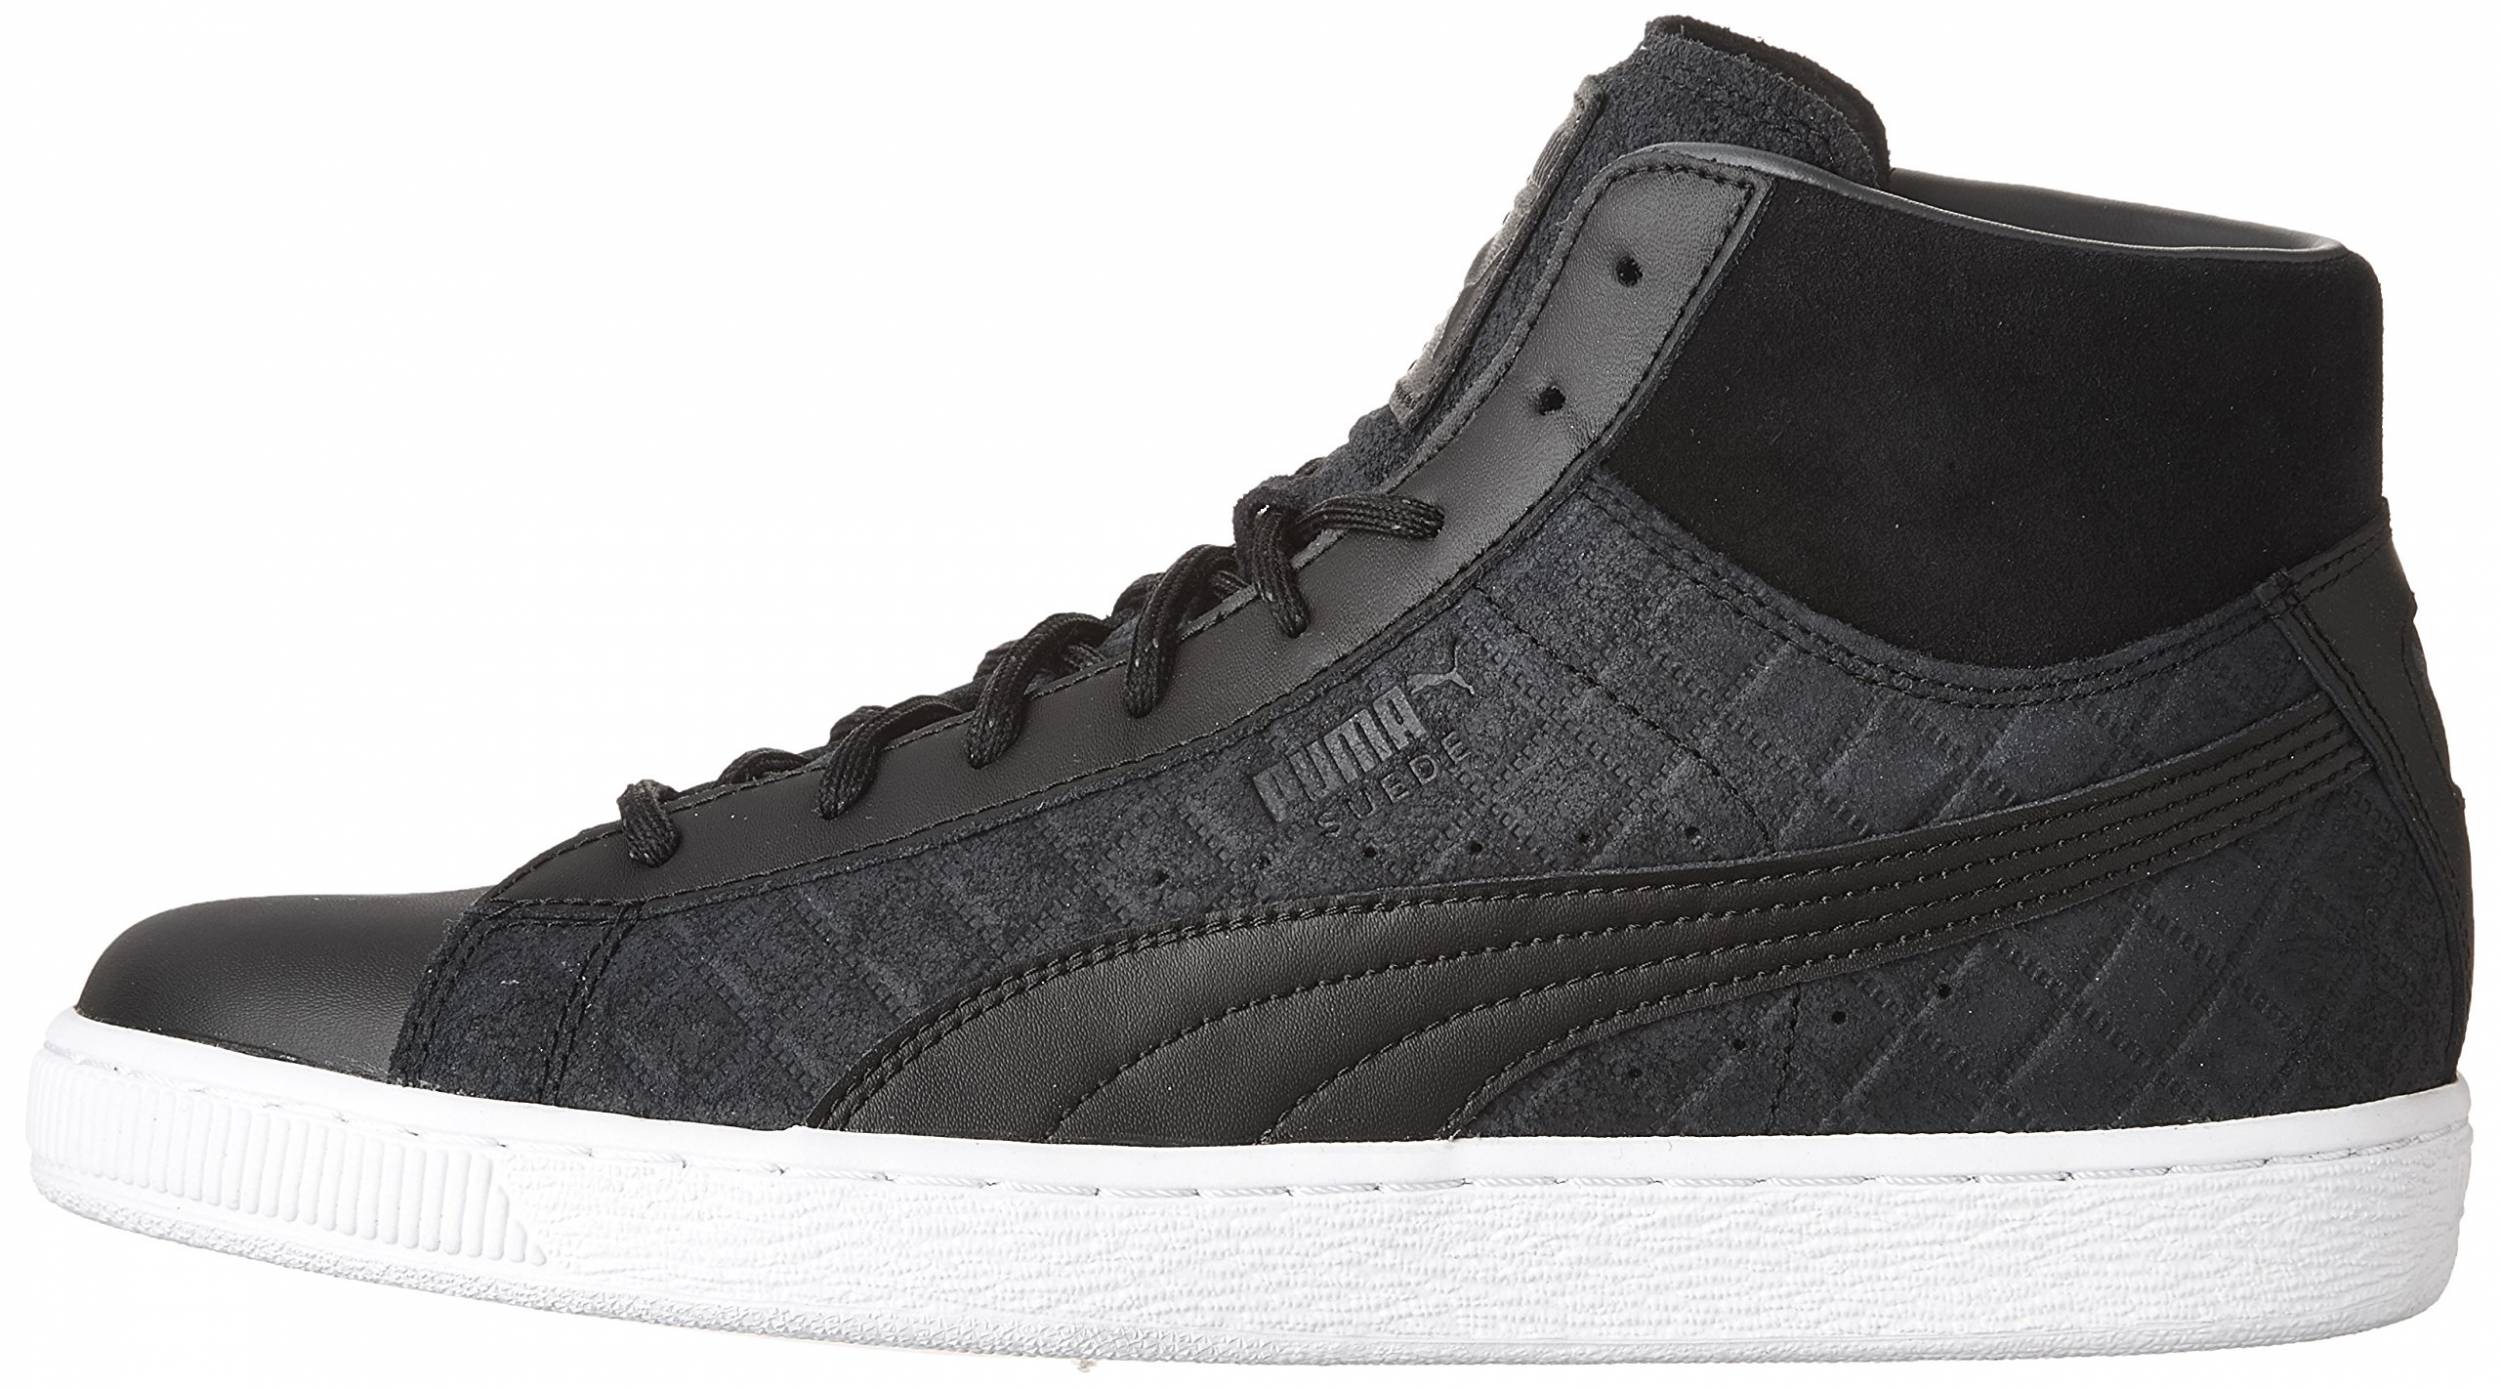 Save 58% on Puma Mid Top Sneakers (14 